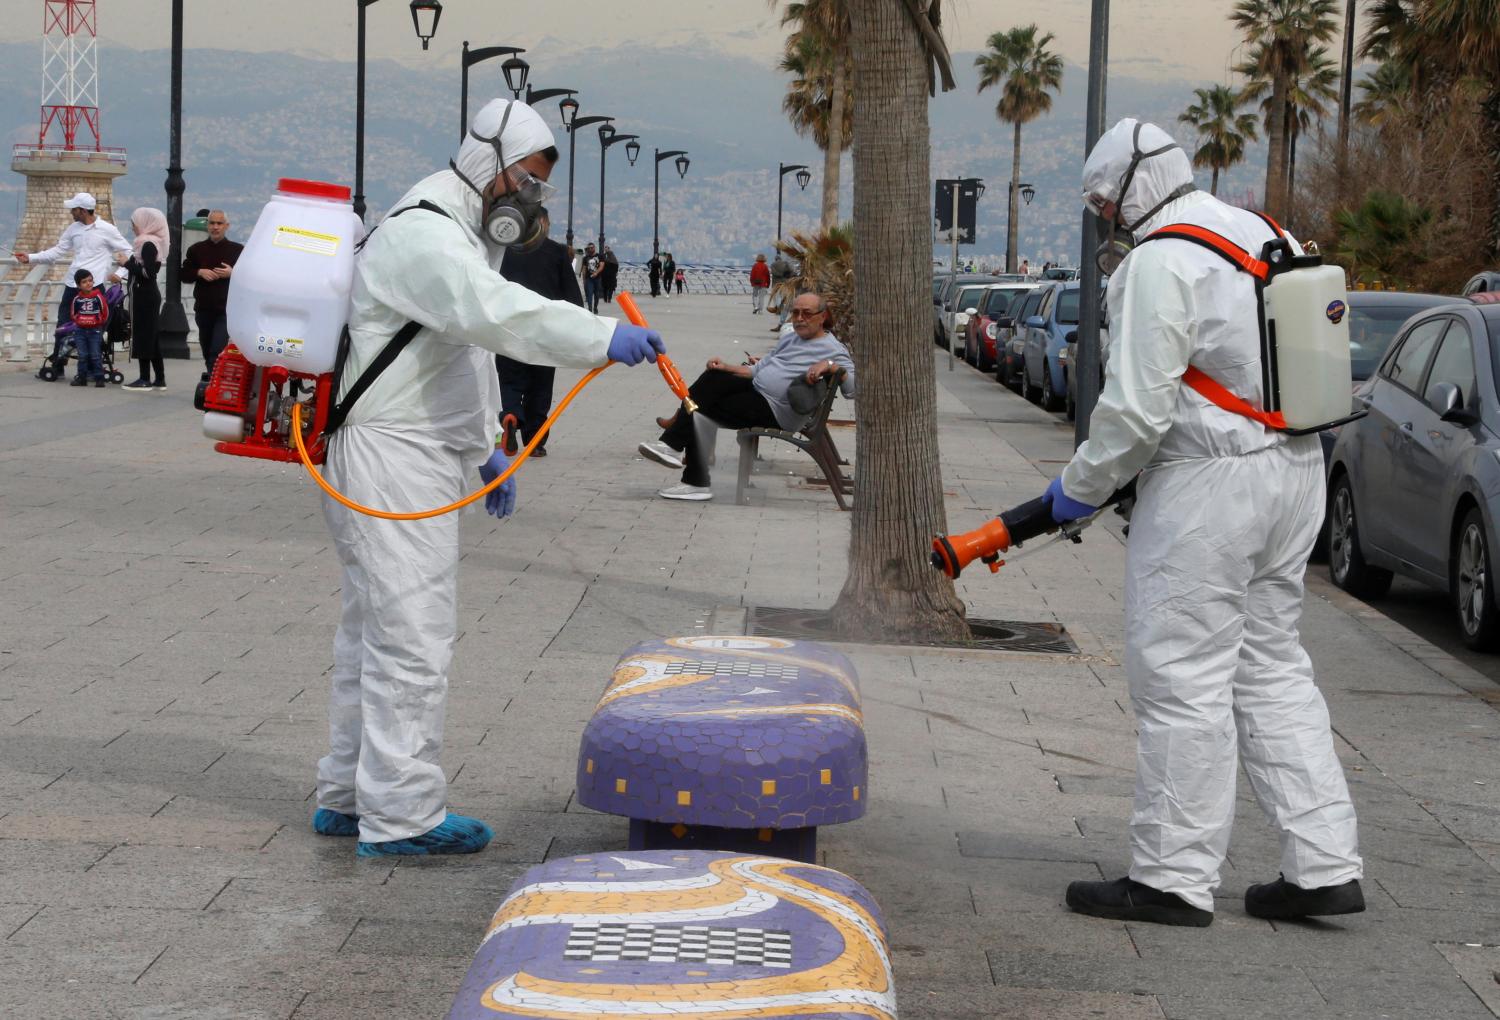 Employees from a disinfection company sanitize a bench as a precaution against the spread of the coronavirus, at Beirut's seaside Corniche, Lebanon March 5, 2020. REUTERS/Mohamed Azakir